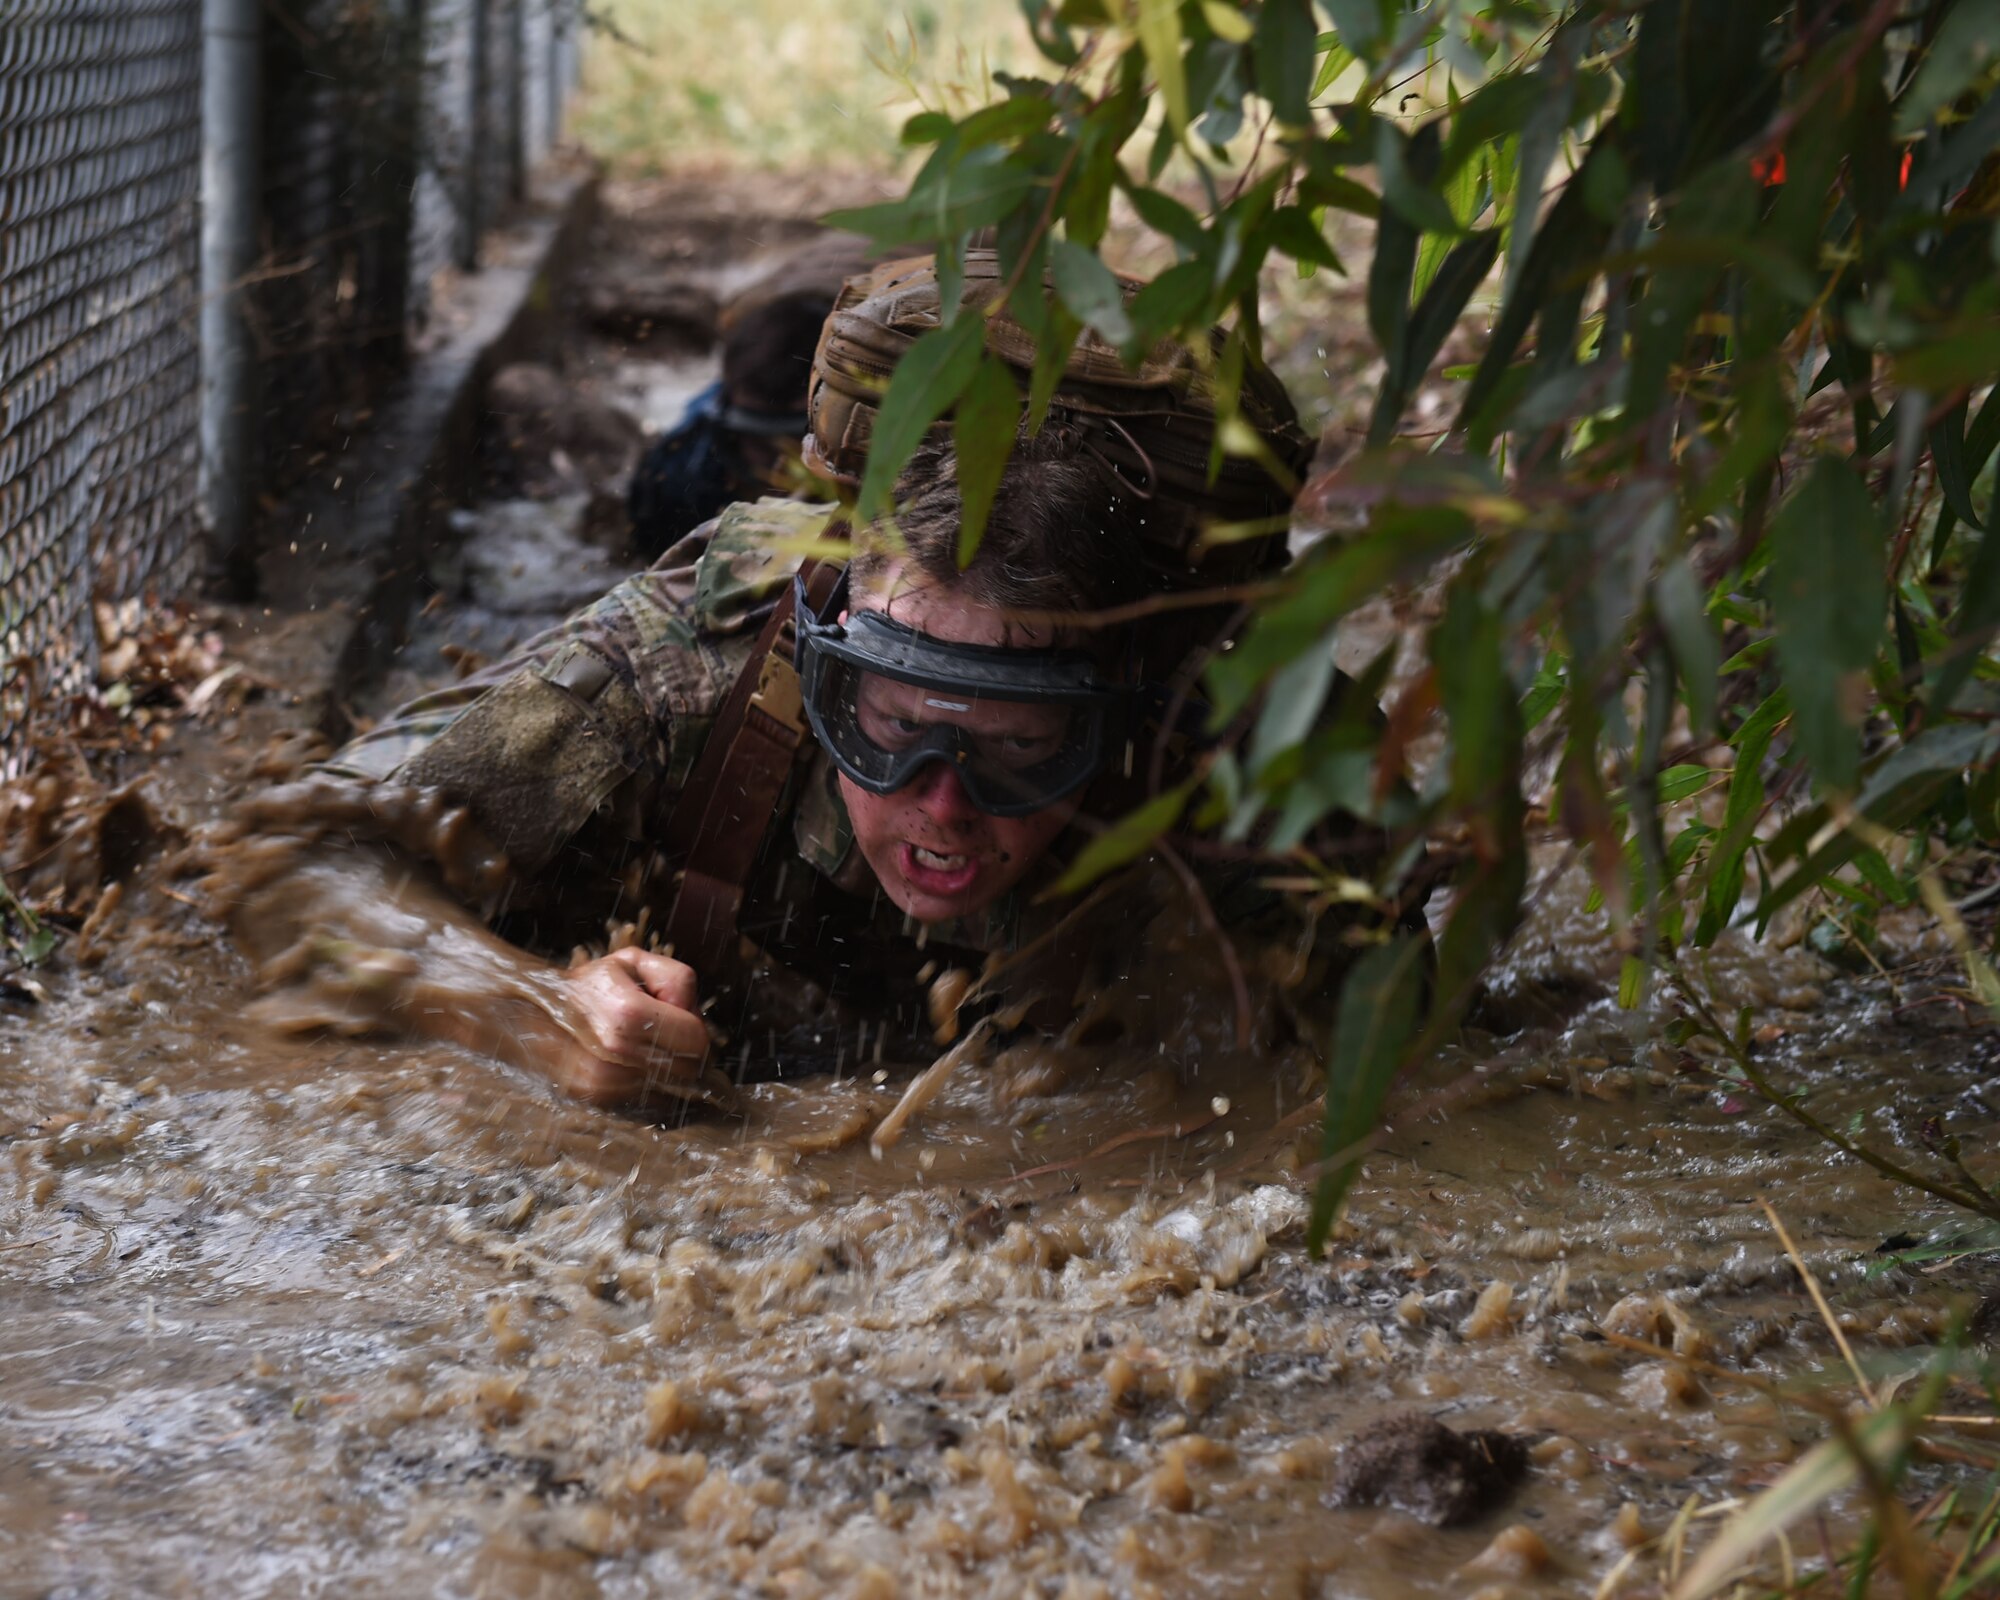 Technical Sgt. James Wilson, aerospace medical technician, participates in the Tactical Casualty Combat Course (TCCC) at Naval Air Station I (NAS) Sigonella on May 14, 2019. The course is designed to place field medics under stressful situations they may encounter when operating in combat zones. (U.S. Air National Guard photo by Senior Airman Katelyn Sprott)